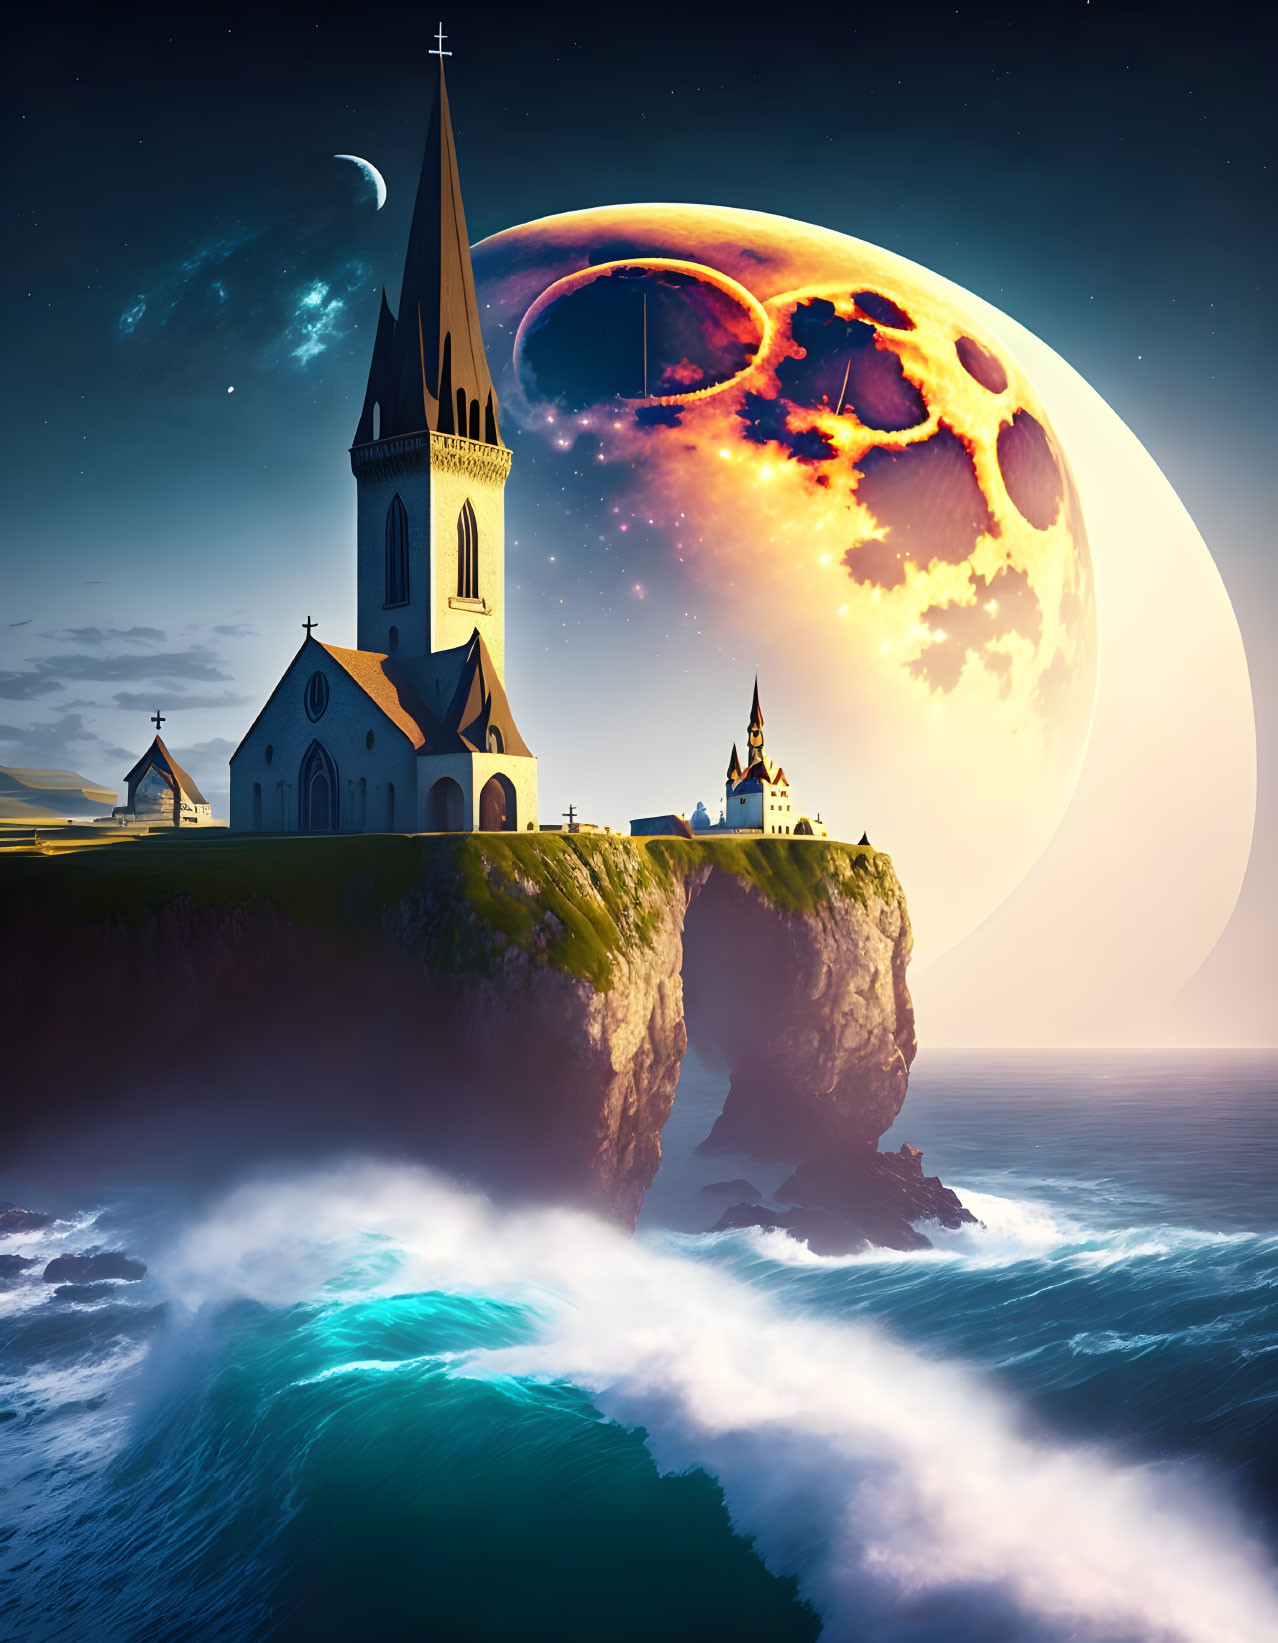 Surreal landscape featuring church on cliff, sea view, and fantasy moon.